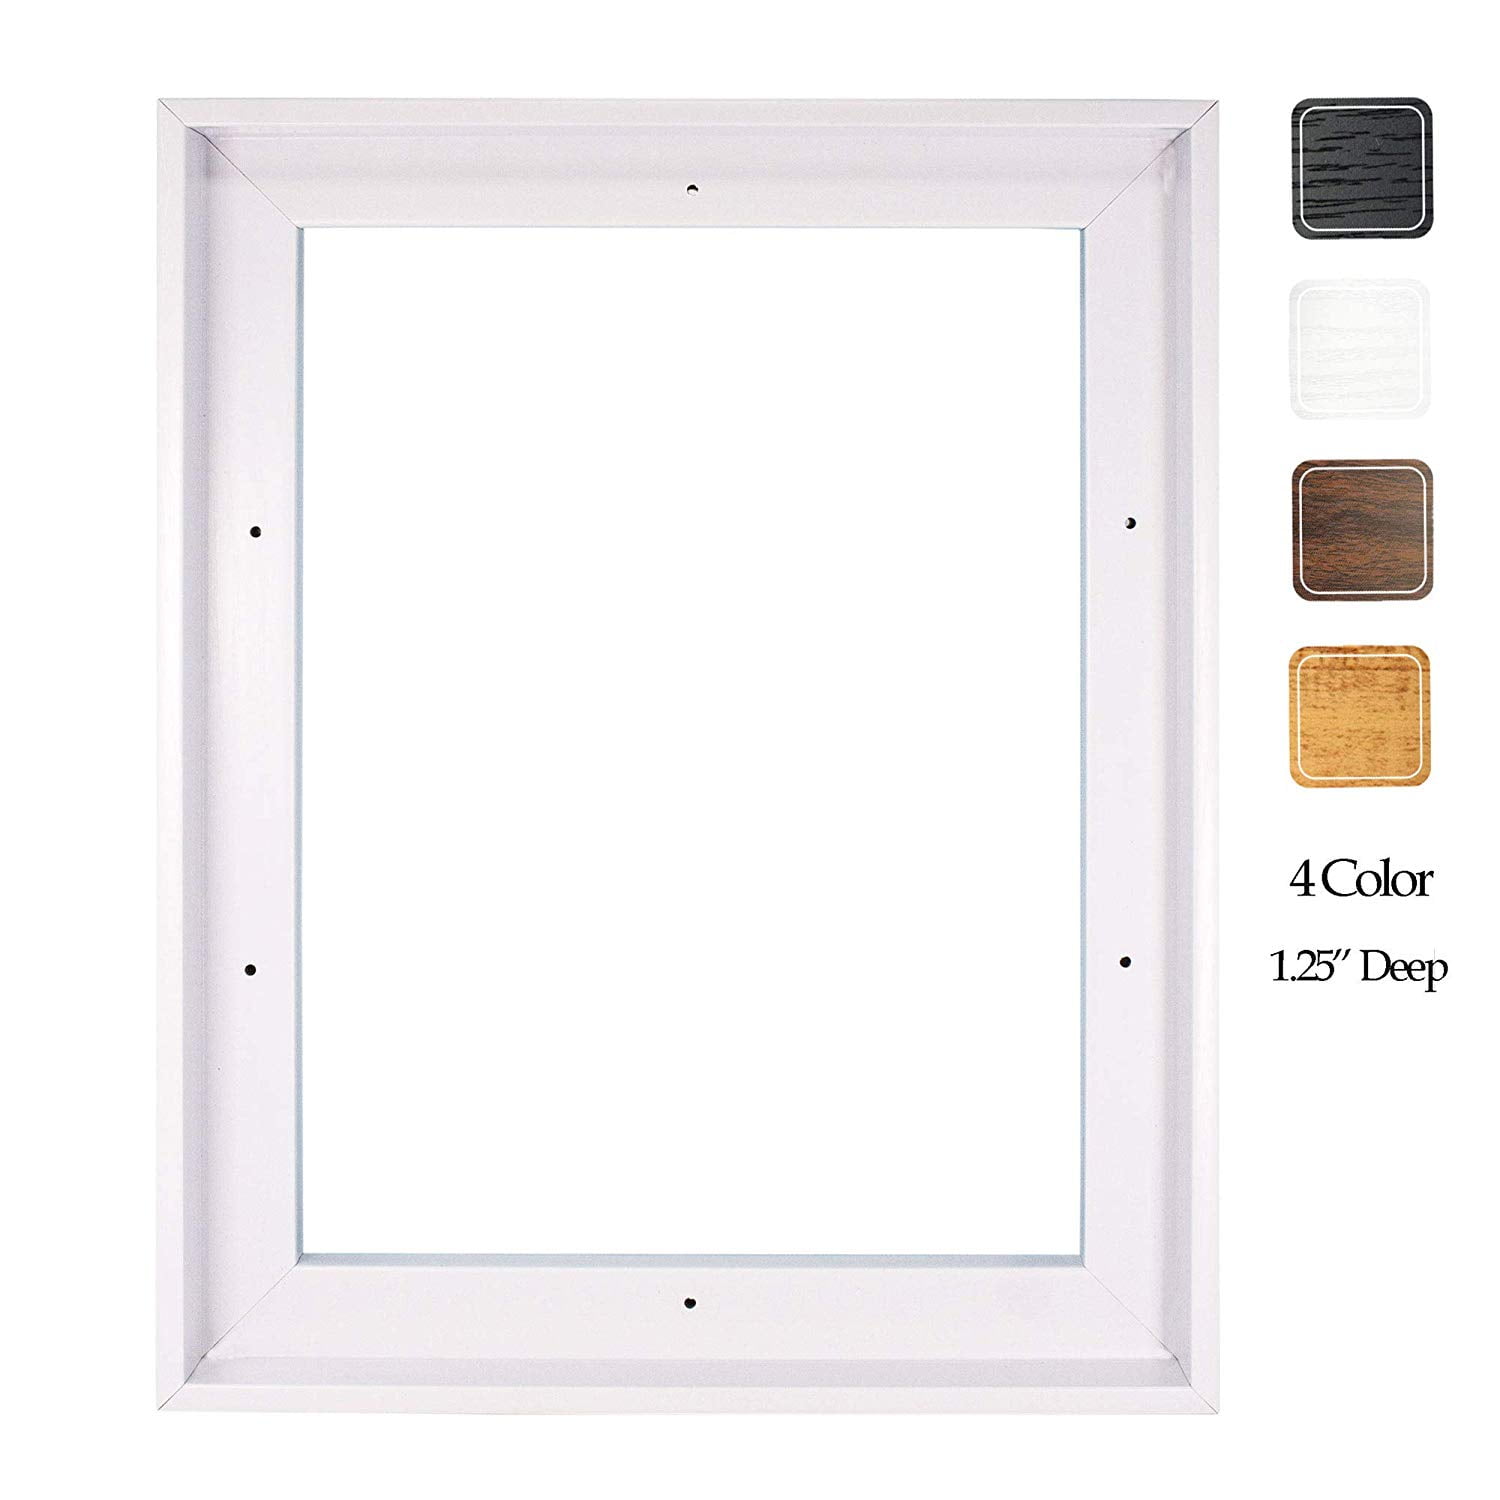 Black, 8 x 8 in Floater Frame for Stretched Canvas and Canvas Panels Square Floater Frames for Canvas Paintings 8x8 1-3/8 inch Thick for 3/4 inch Deep Canvas 